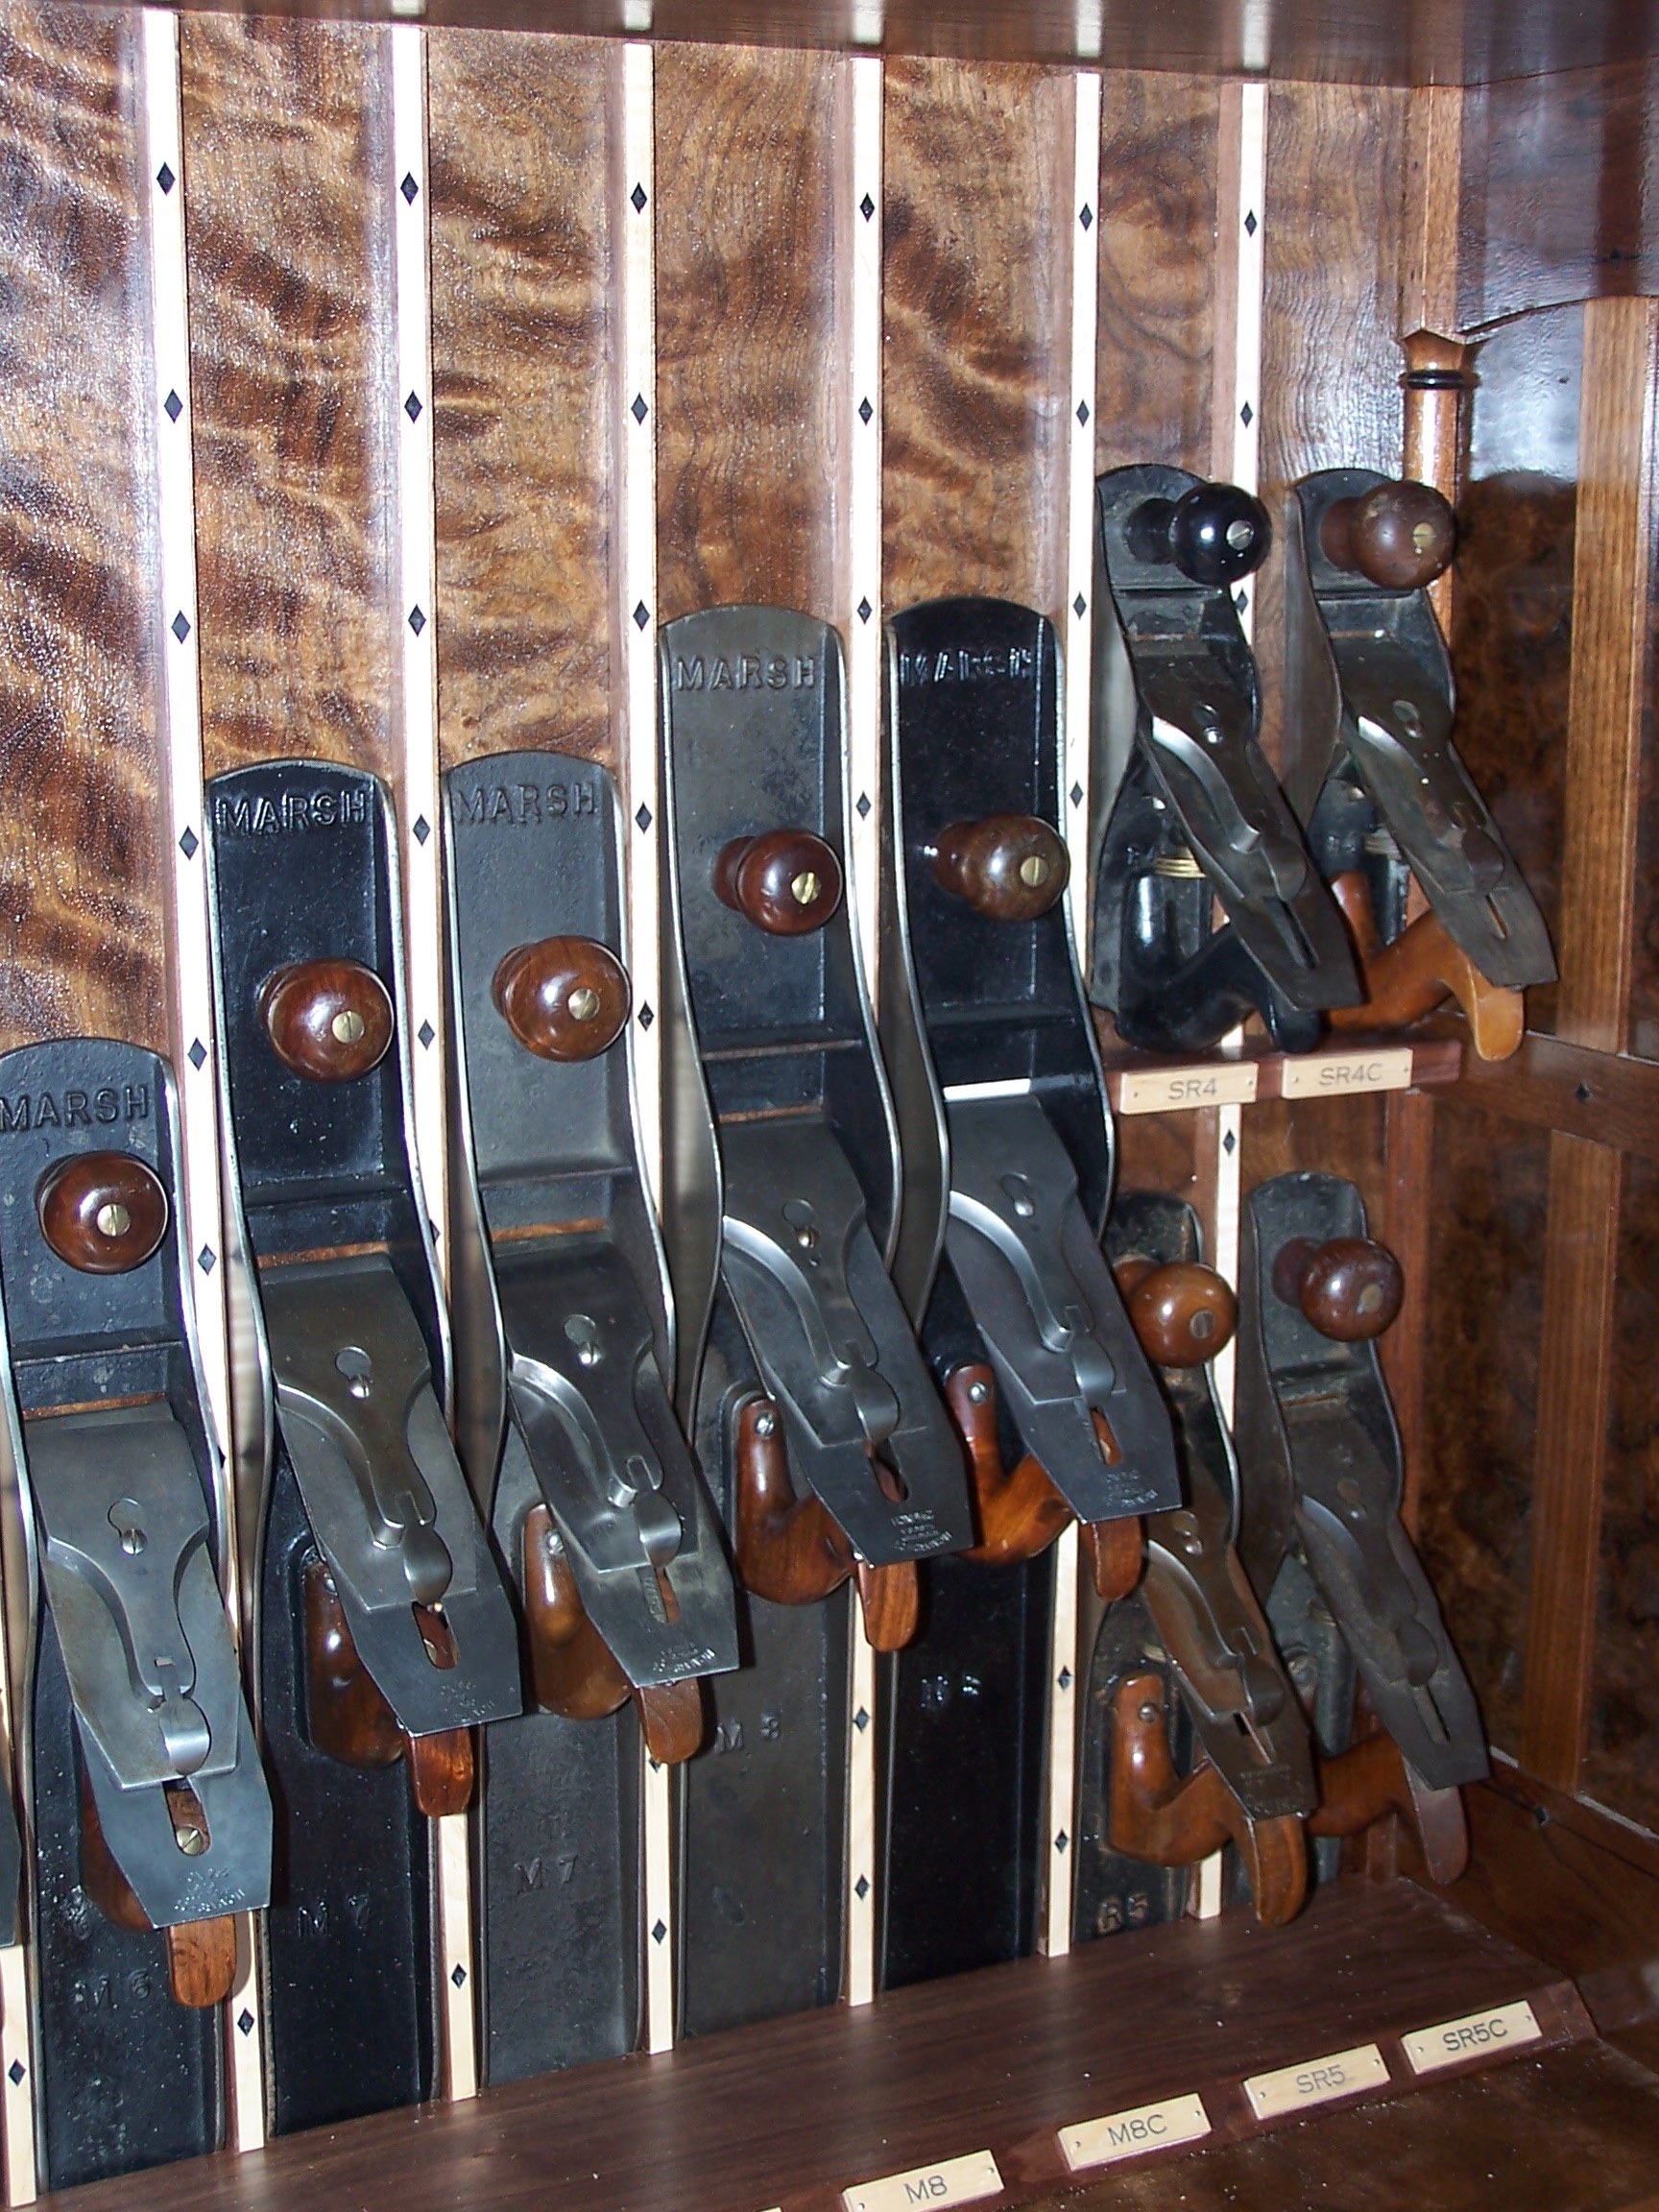 Some of the larger Marsh Bench Planes